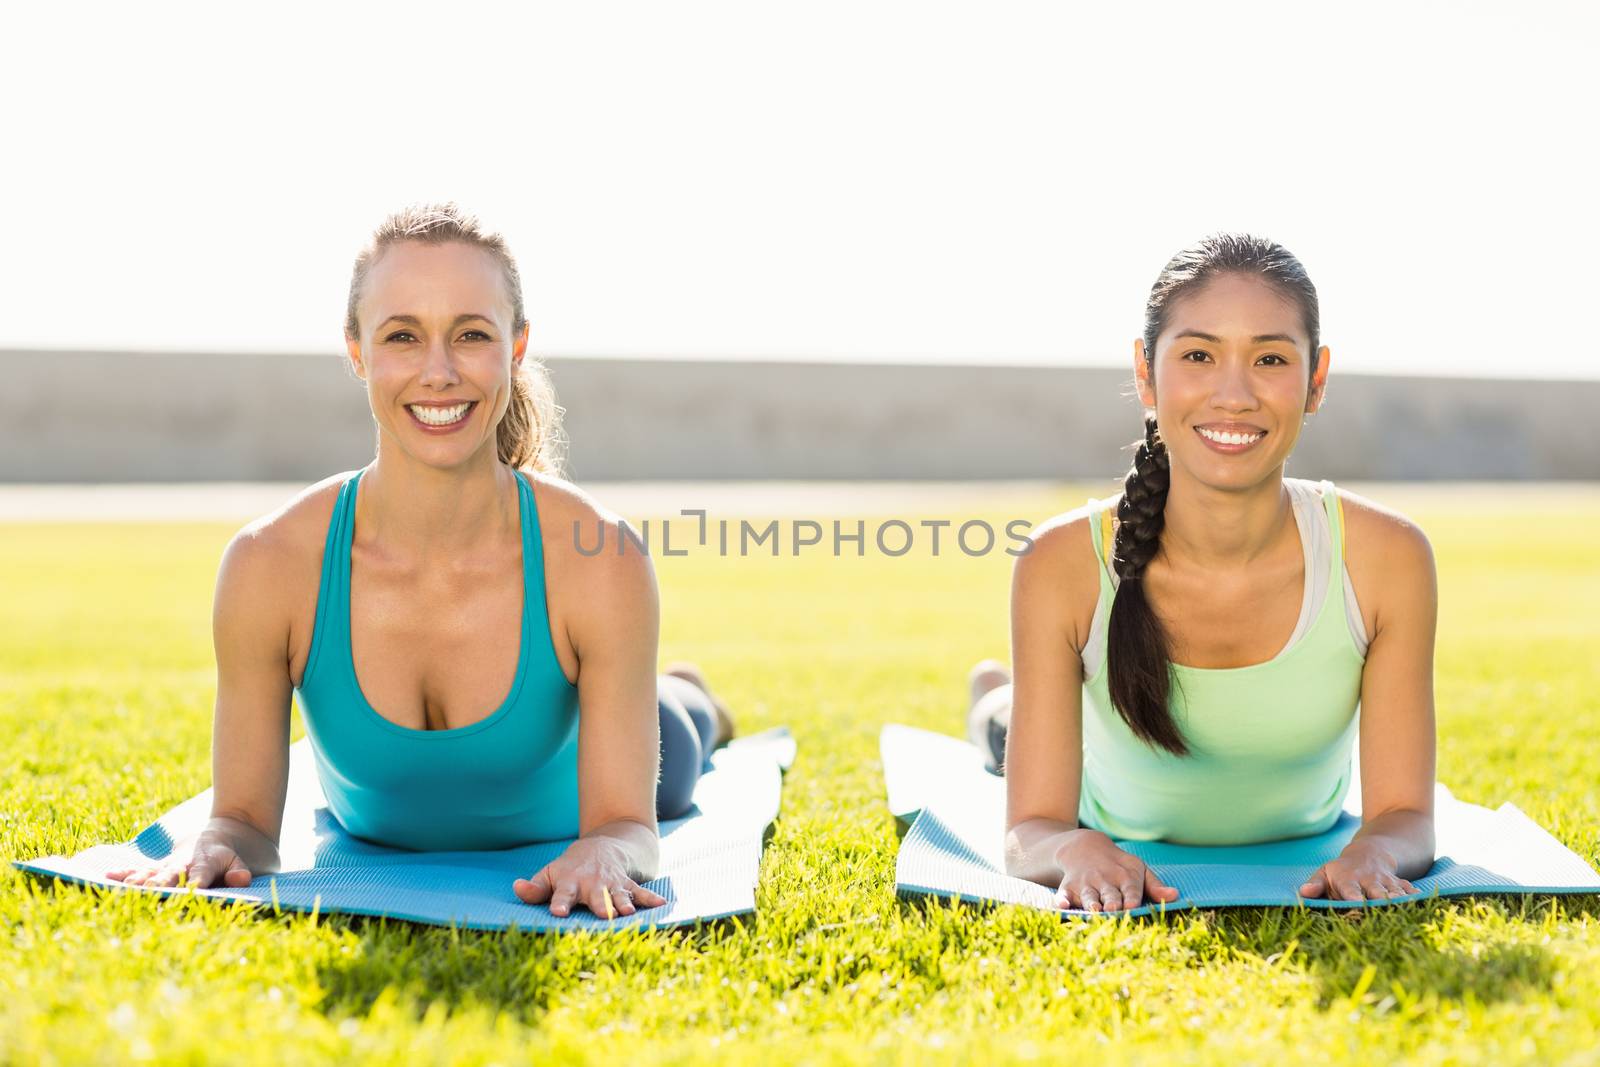 Portrait of smiling sporty women on exercise mats in parkland